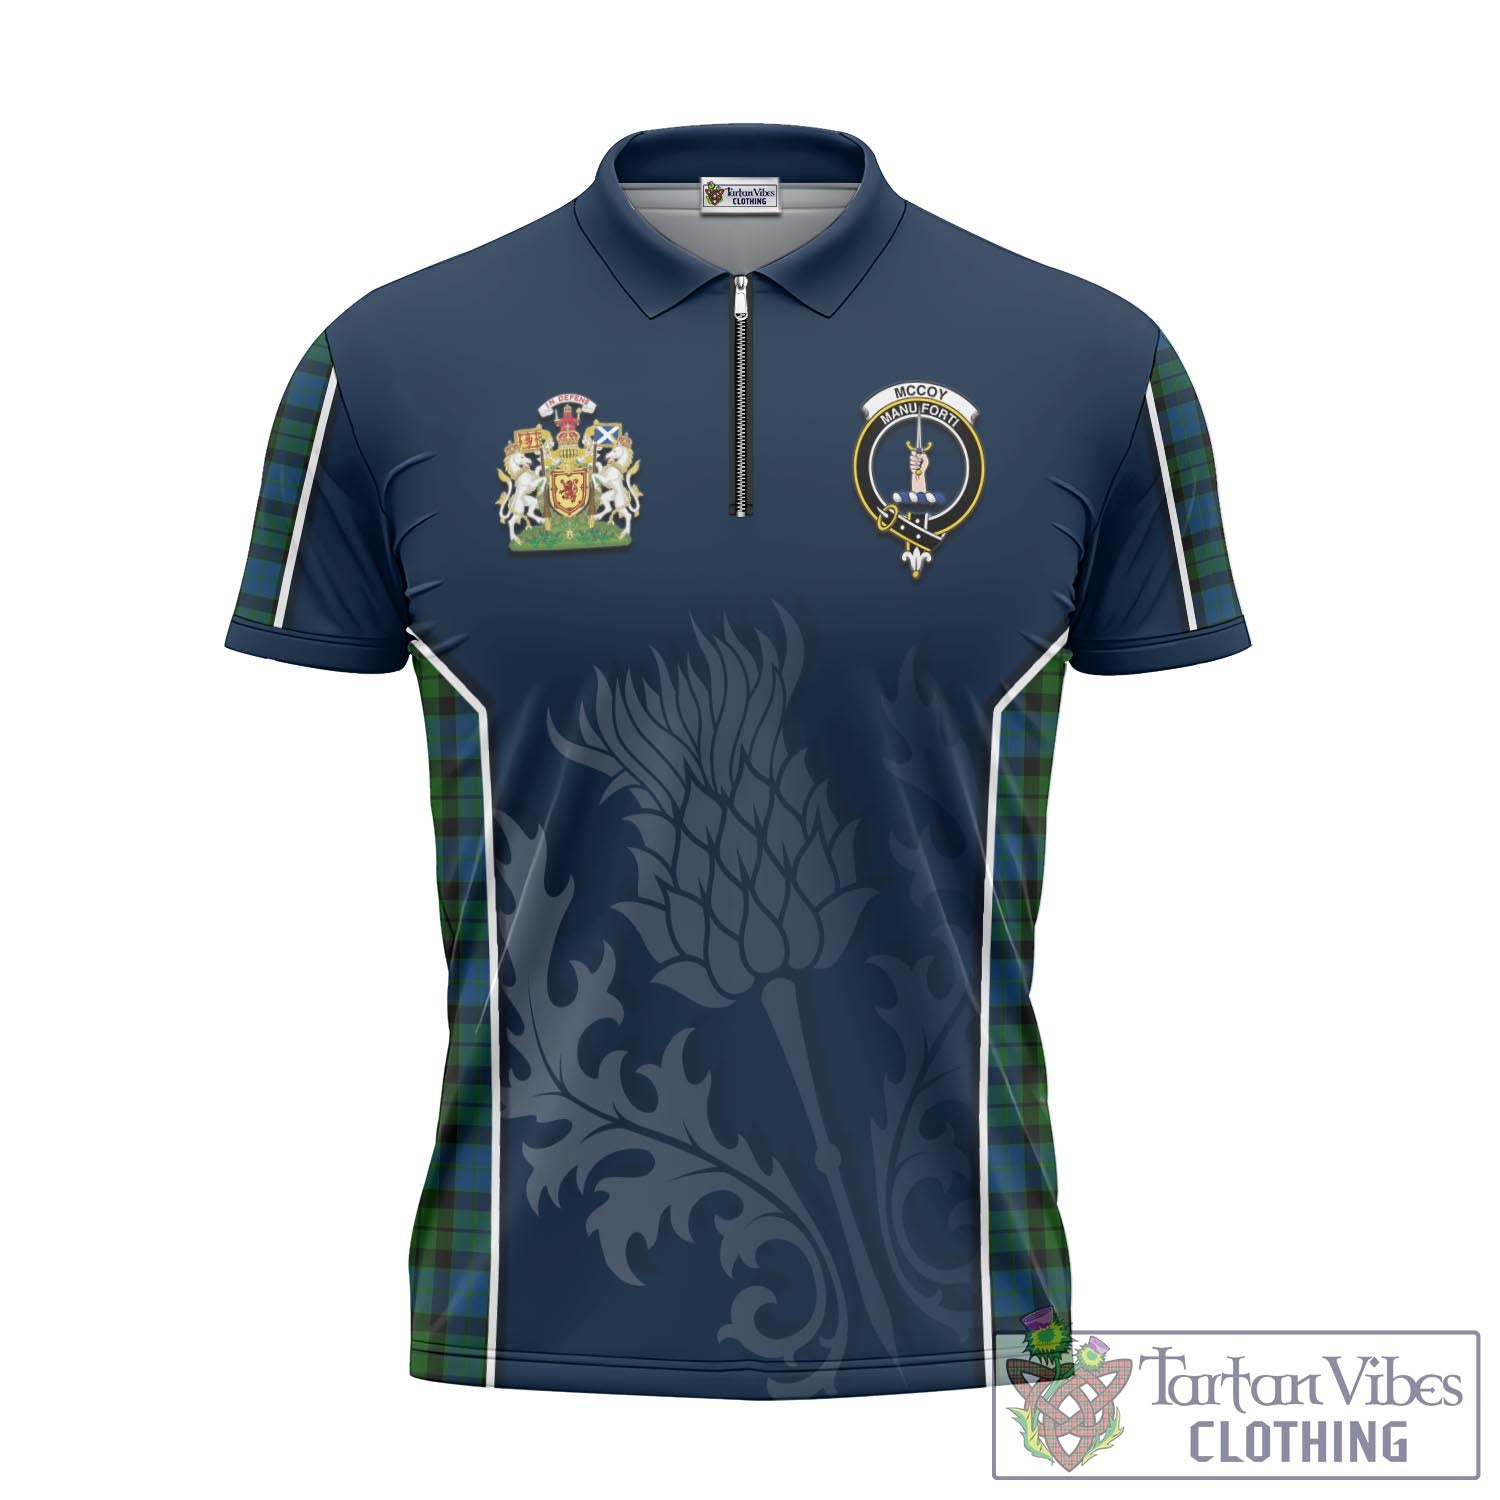 Tartan Vibes Clothing McCoy Tartan Zipper Polo Shirt with Family Crest and Scottish Thistle Vibes Sport Style